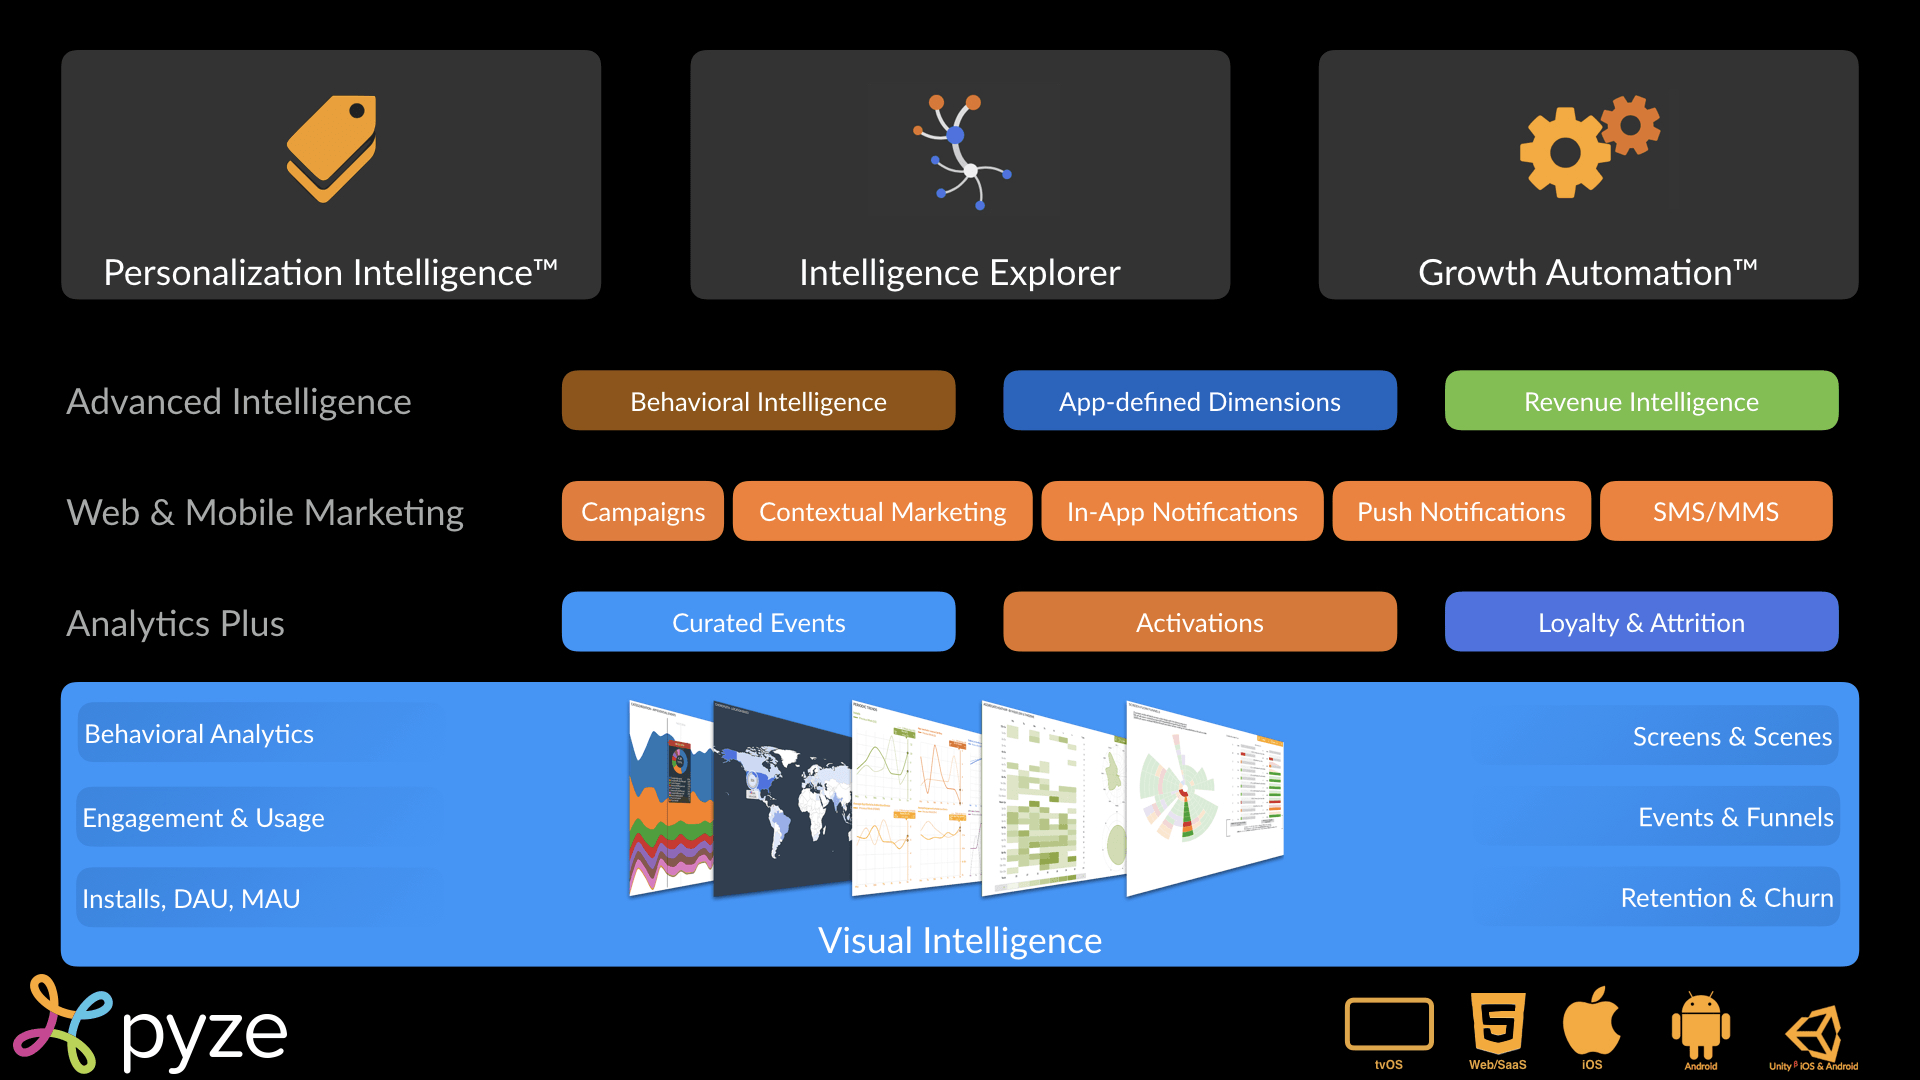 Introducing Pyze Growth Intelligence 2.0